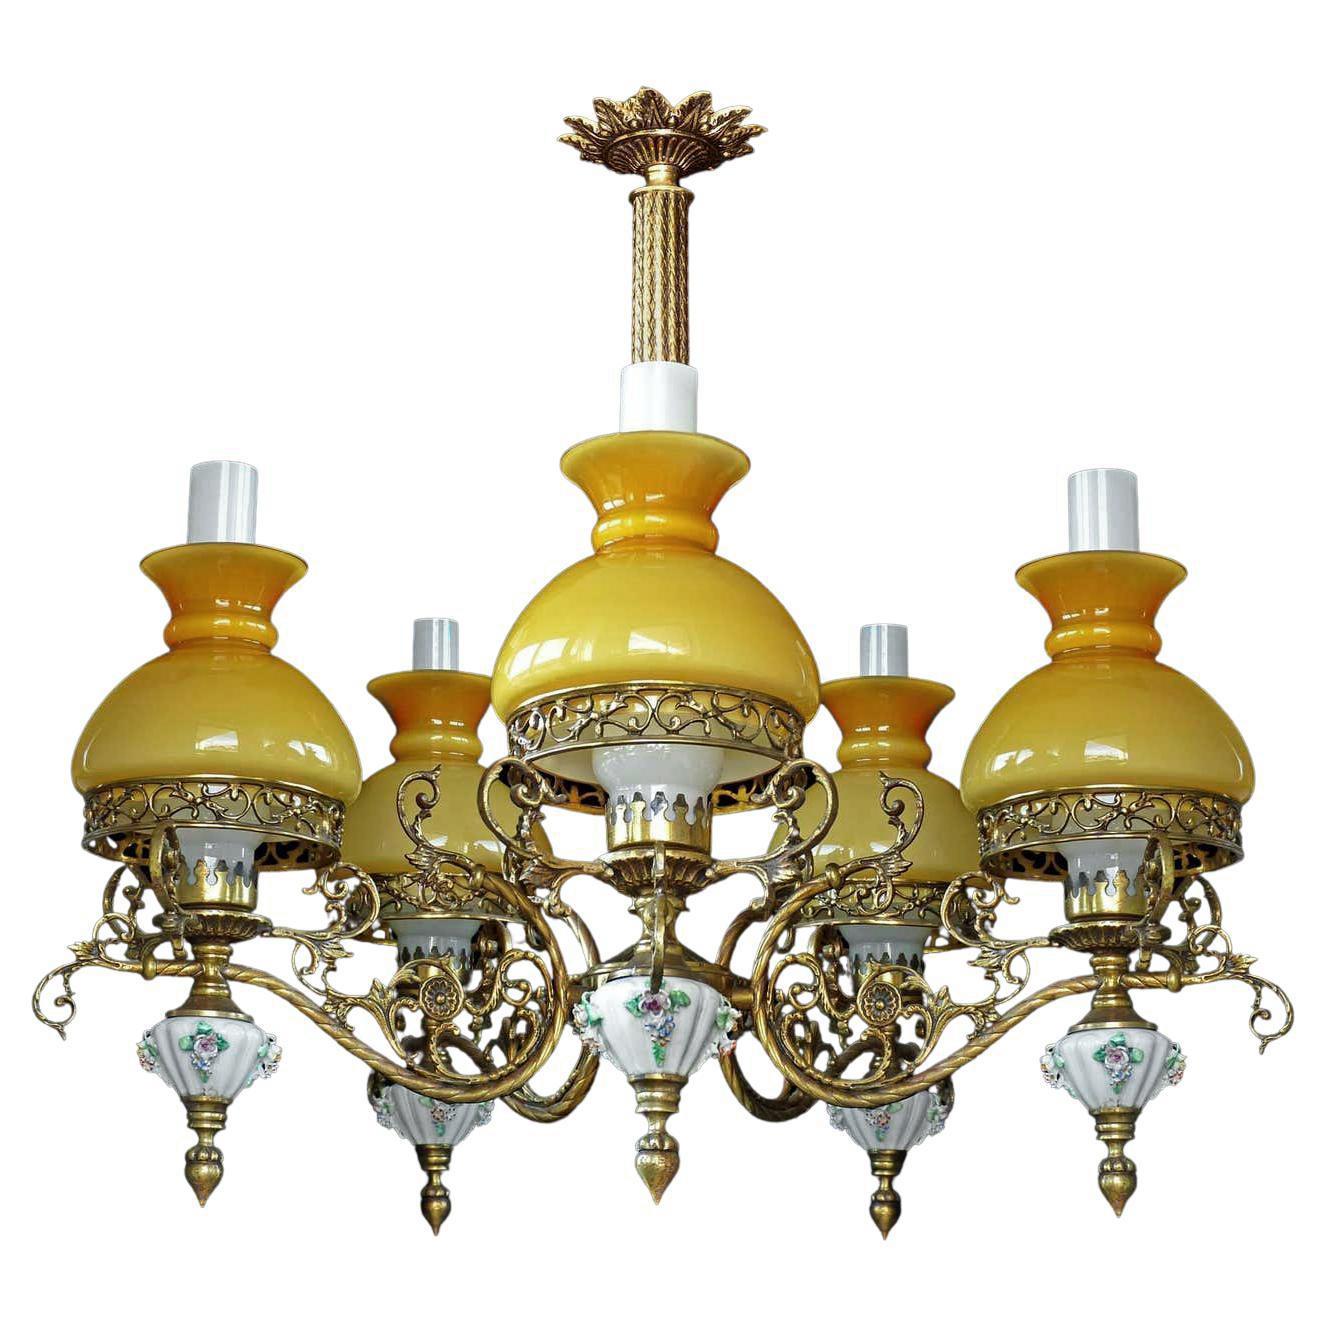 Gorgeous antique pair circa 1920 French Victorian floral encrusted porcelain five-light bulbs chandelier/bronze and opaline amber glass shades
Porcelain/opaline amber cased glass/chiseled gilt bronze/ brass
Five-light bulbs e 14 /good working